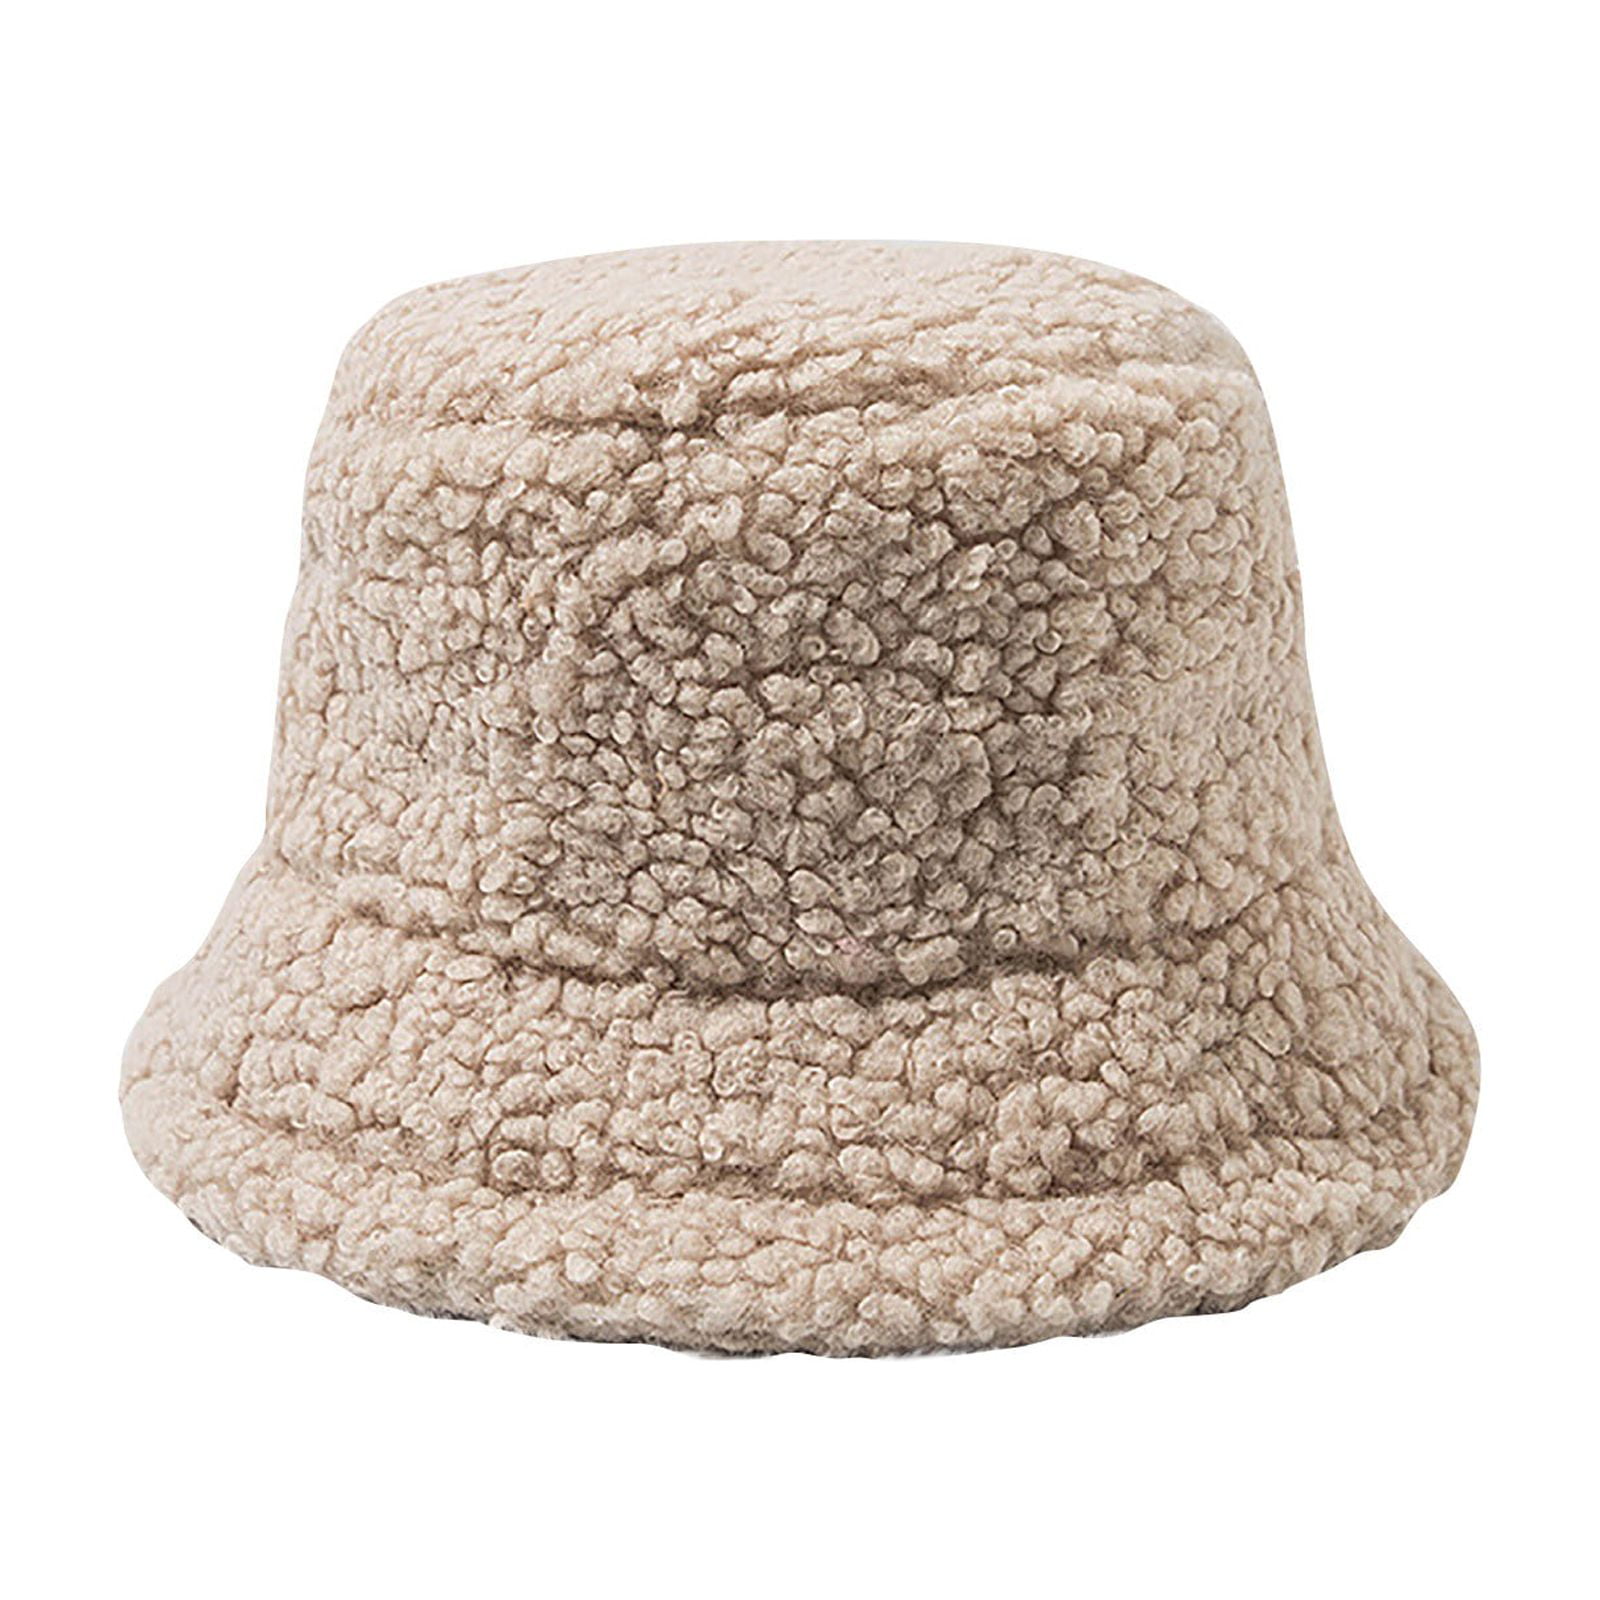 Pgeraug Baseball Caps Cashmere Bucket Cute And Warm Caps Hunting Fishing  hats for women Beige 